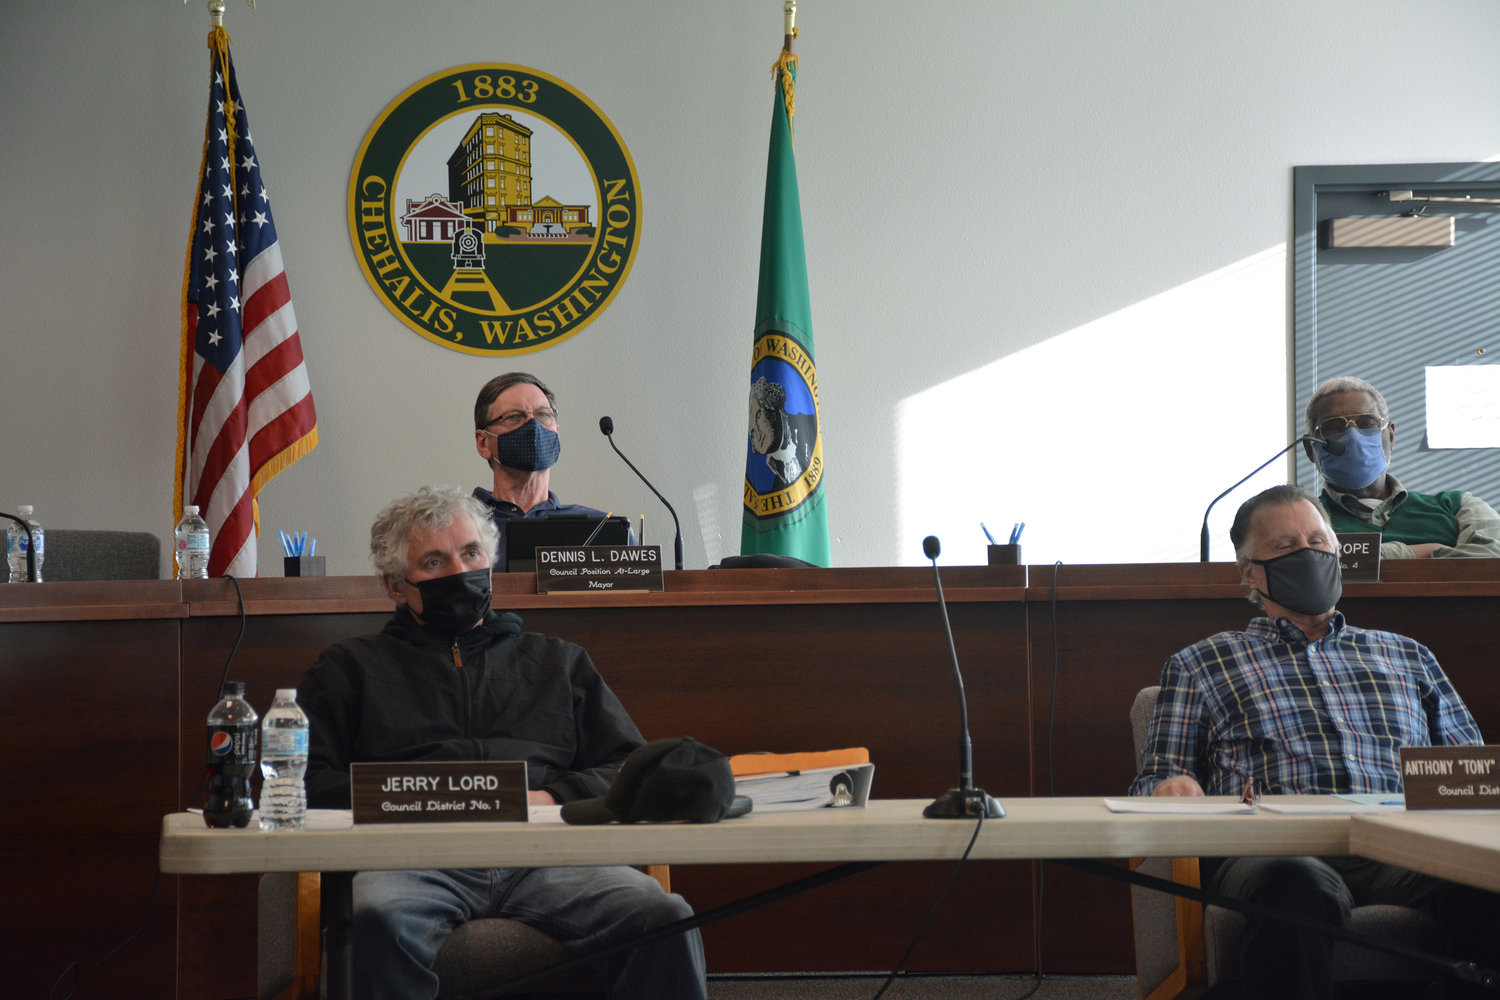 Chehalis City Council members listen to a member of the public’s critiques at a meeting last month.